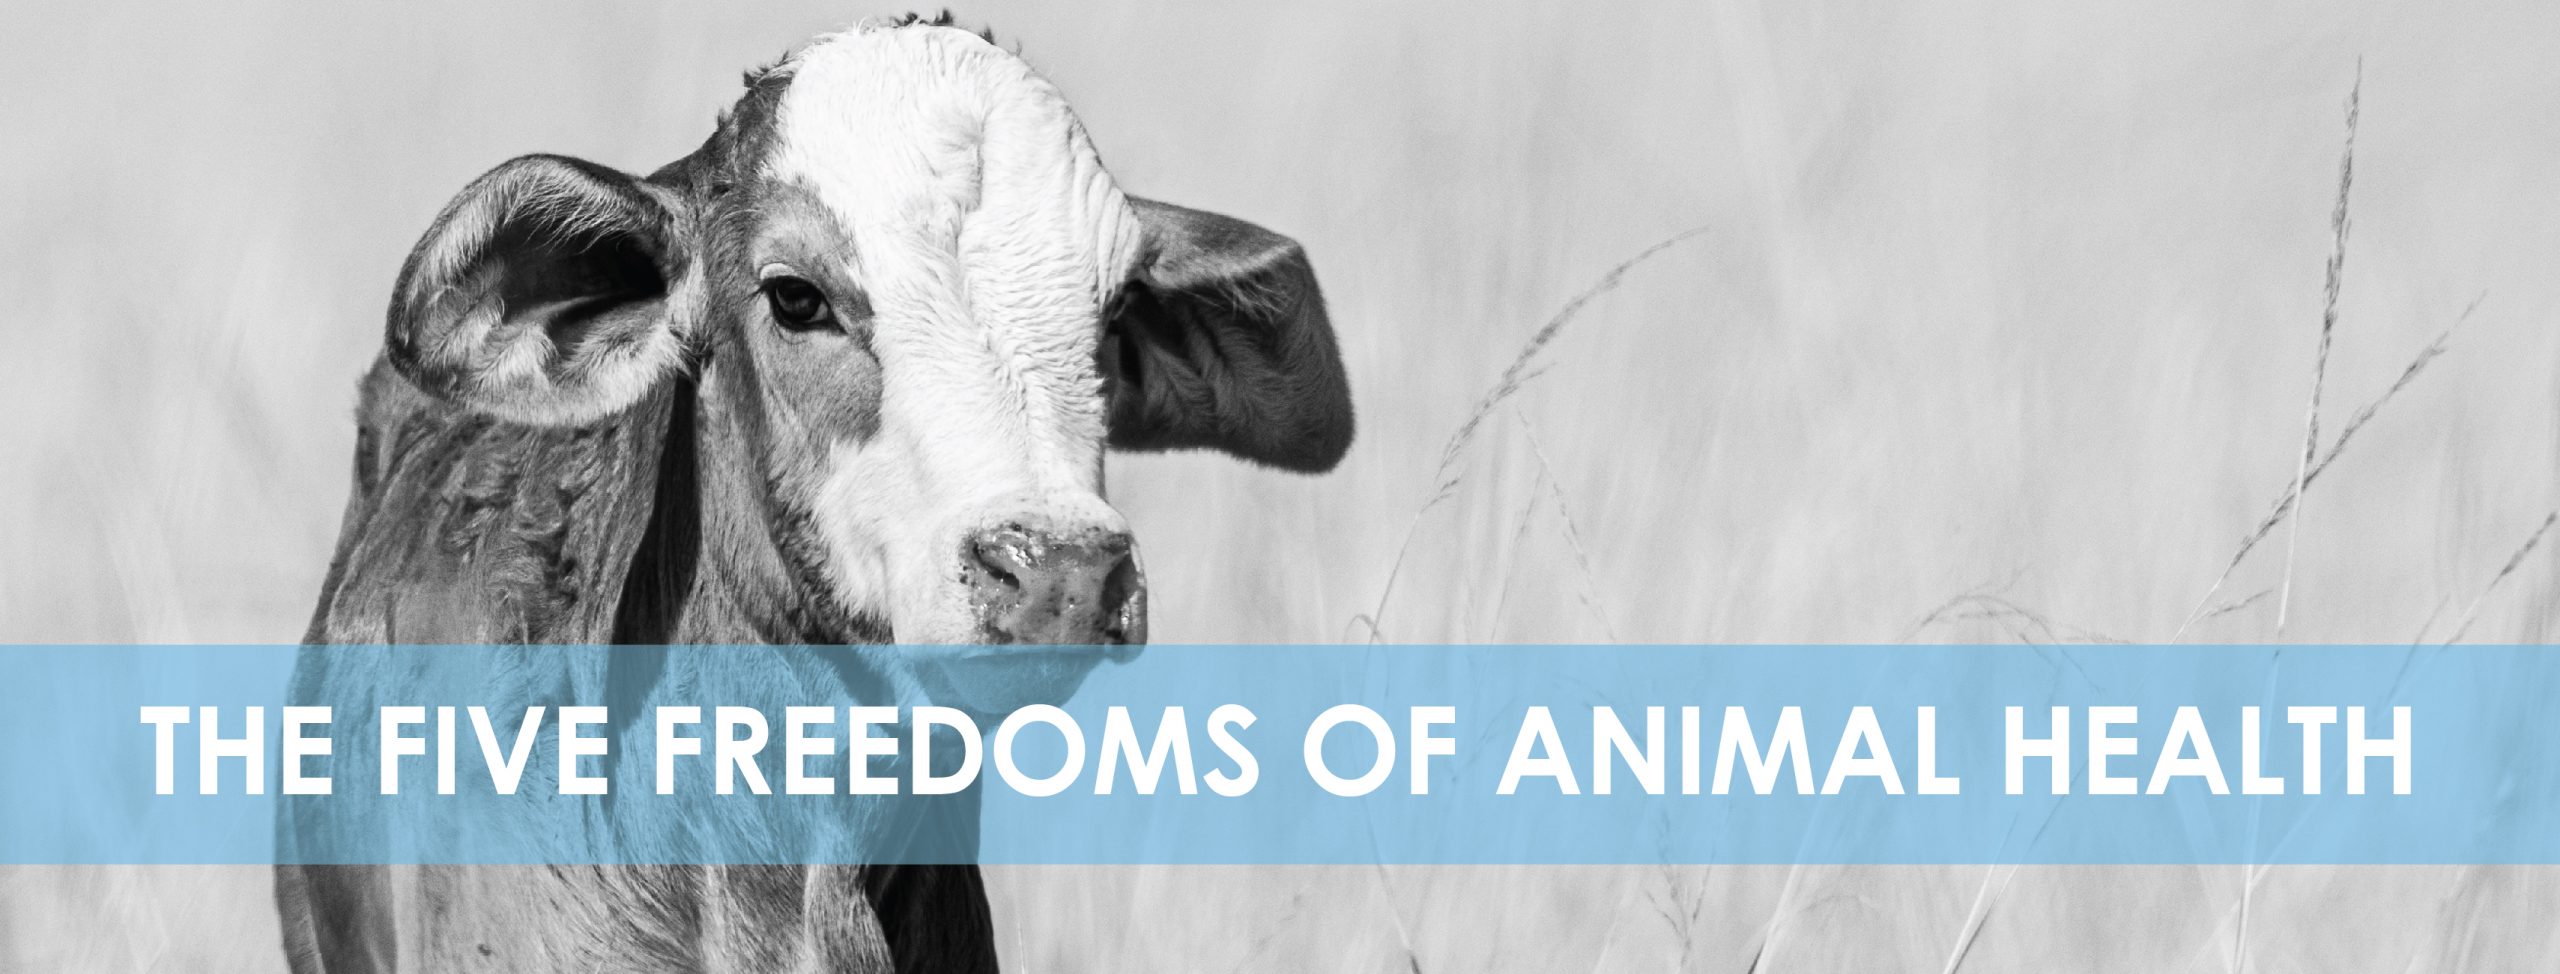 The Five Freedoms of Animal Welfare